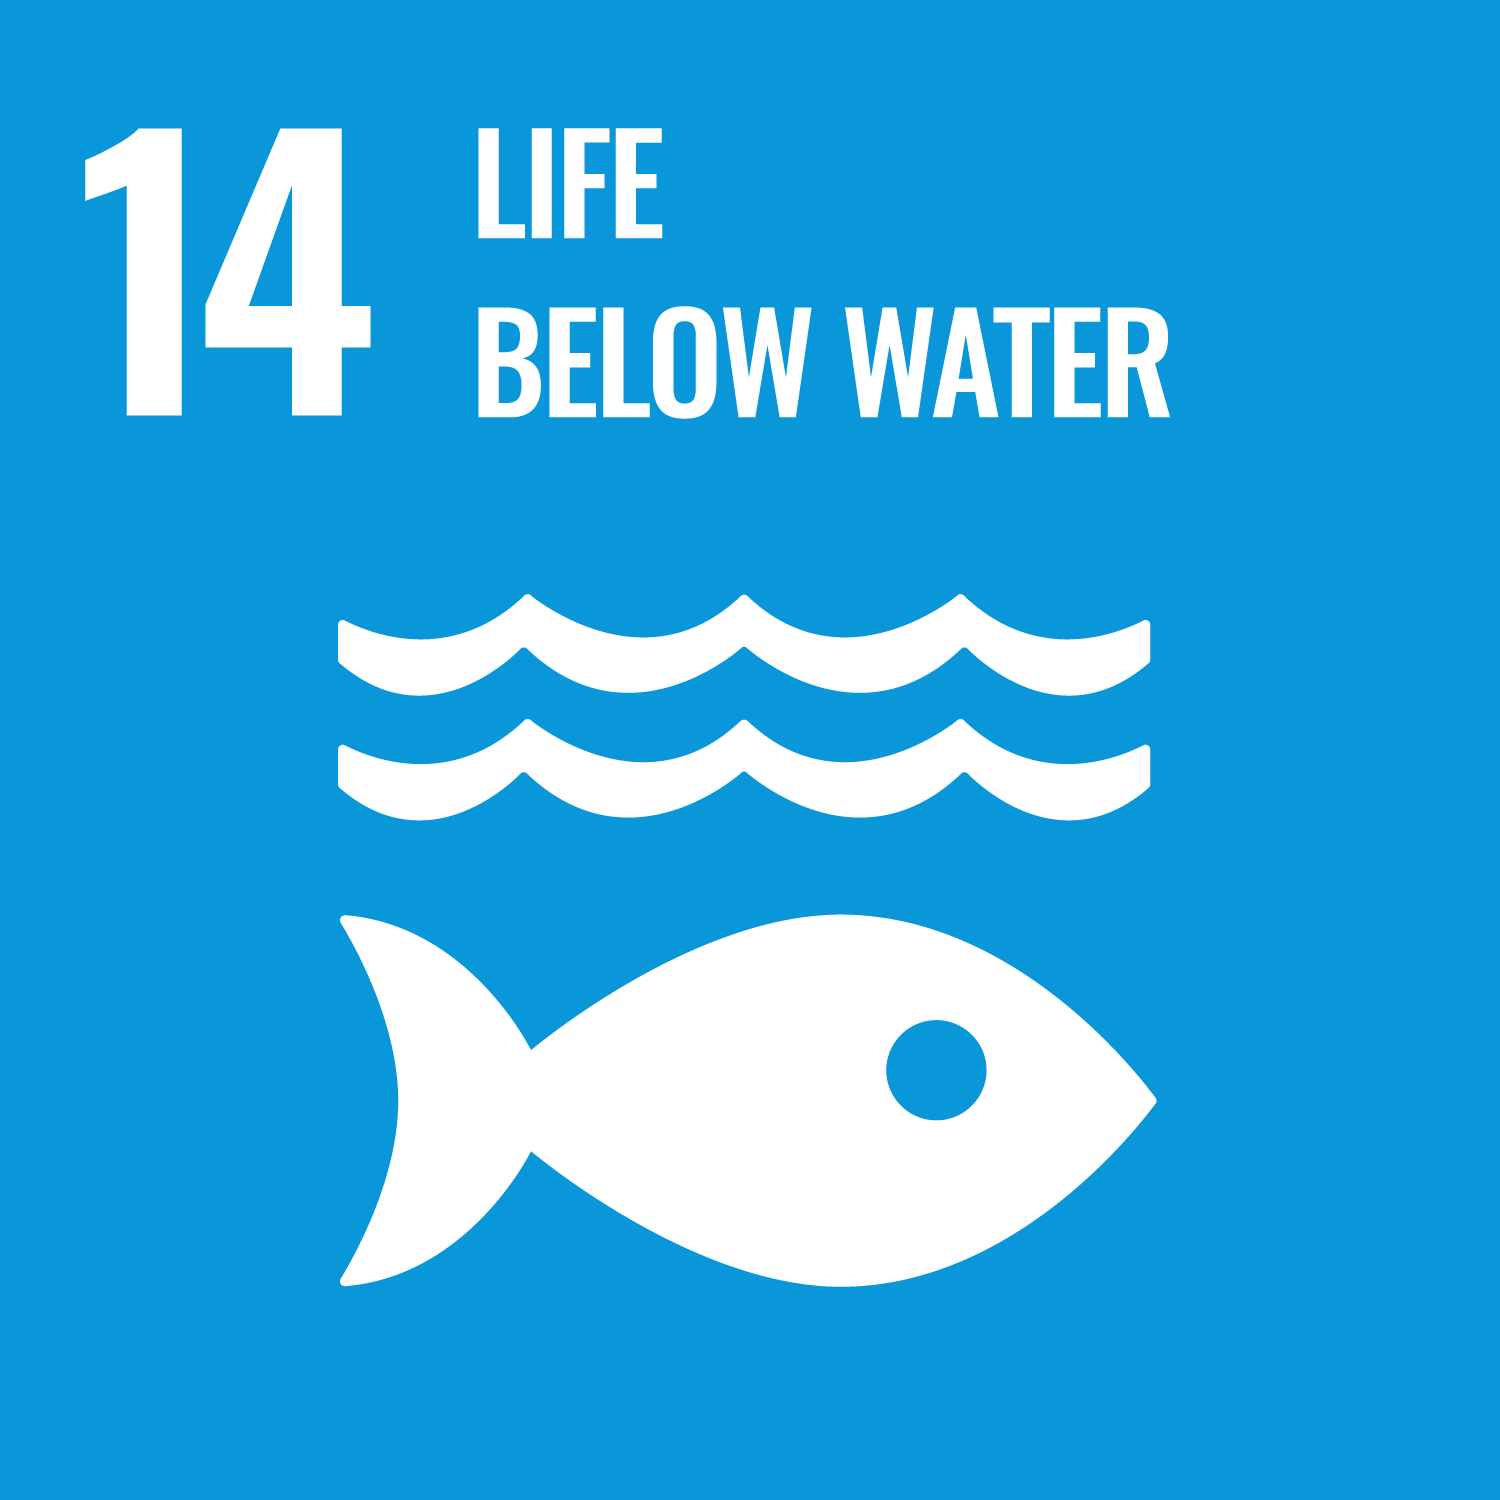 United Nations Sustainable Development Goal Number 14: Life Below Water